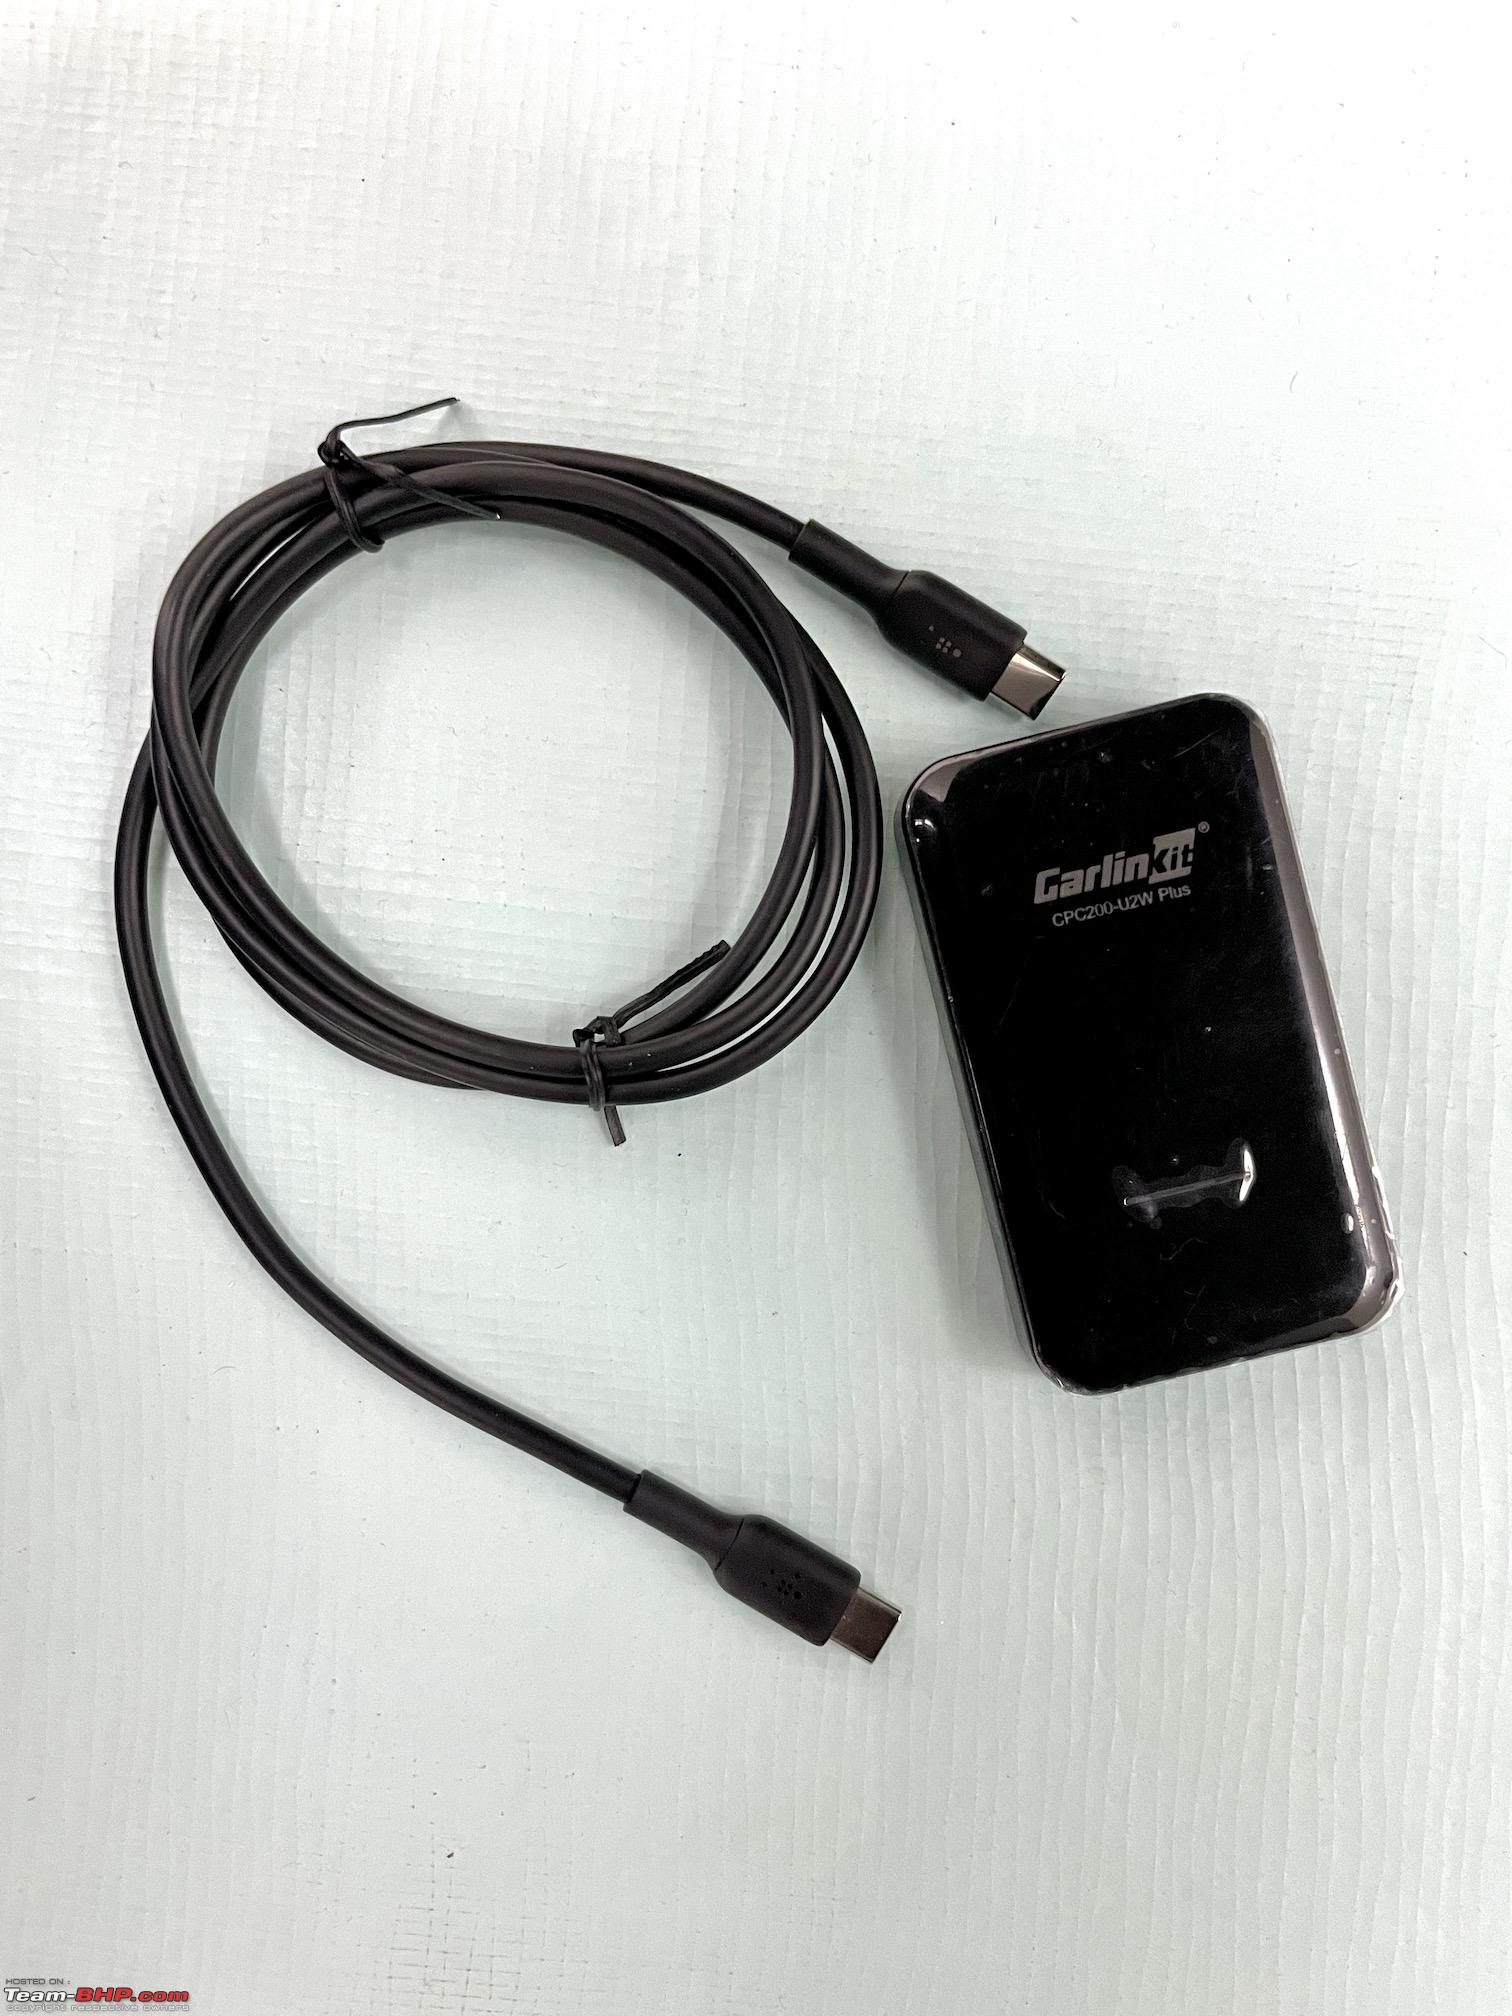 Highly Anticipated Android Auto Wireless Dongle Ready for the